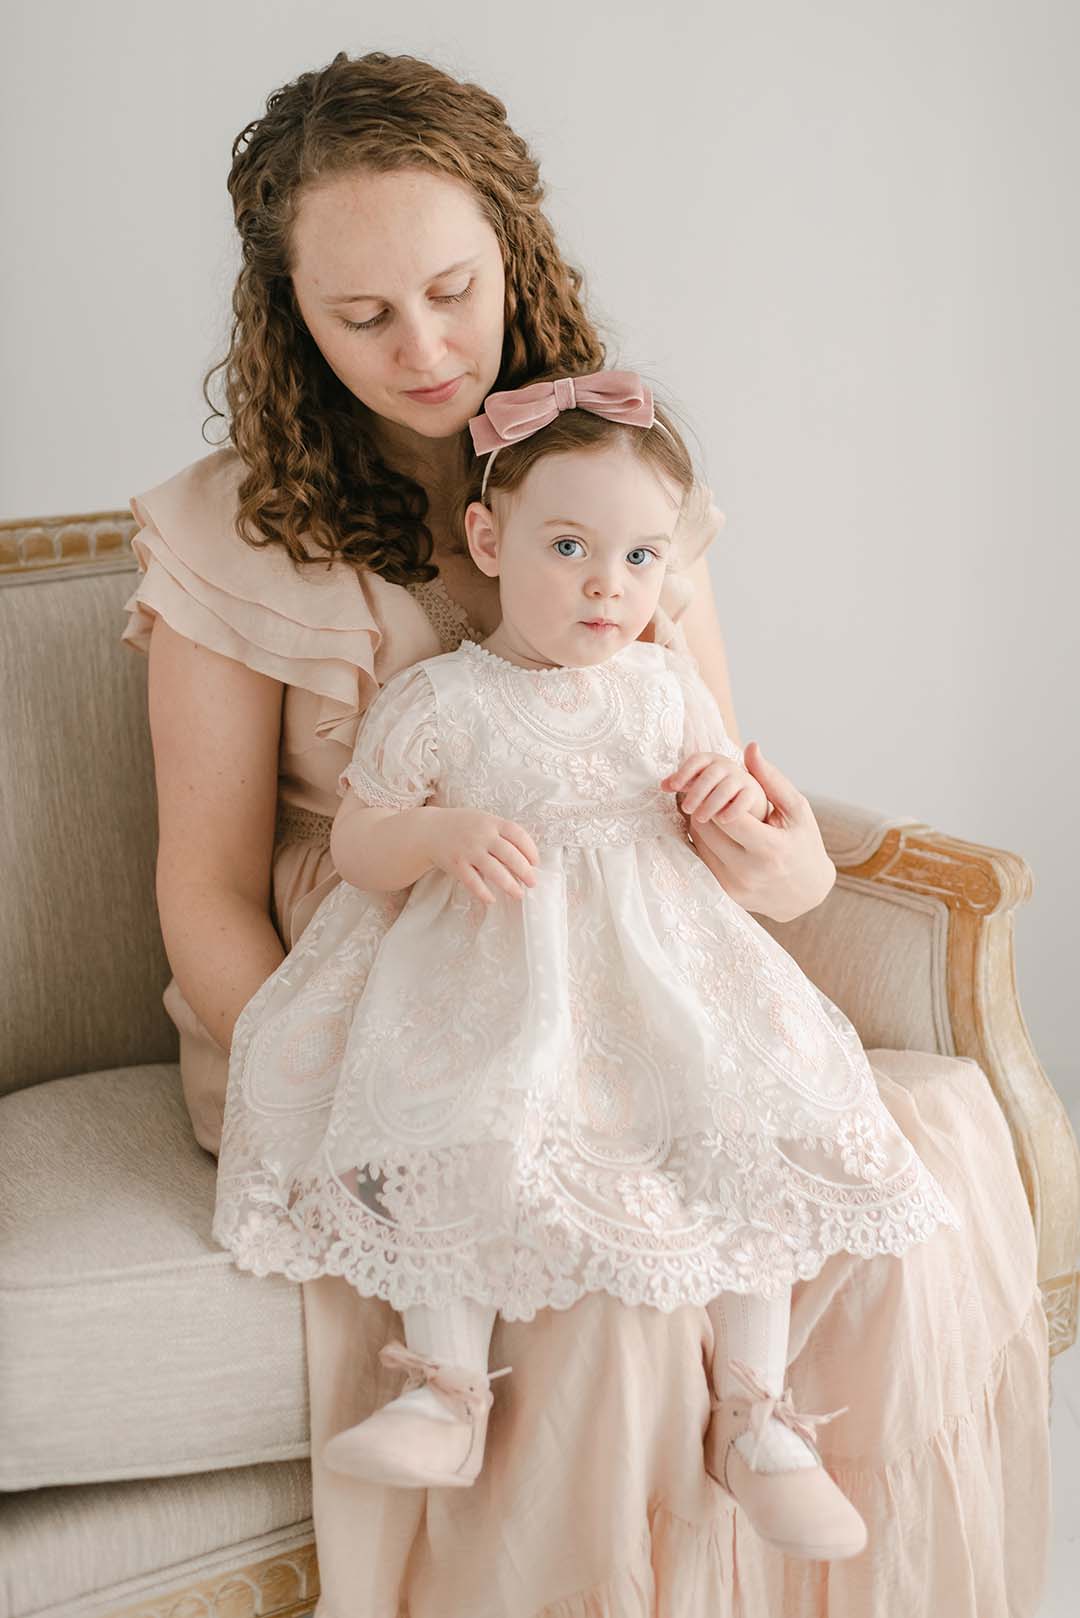 A woman with curly hair and a pink dress tenderly holds a baby girl in an Elizabeth Christening Dress on her lap, seated on an upscale light beige couch. Both are looking directly at the camera.